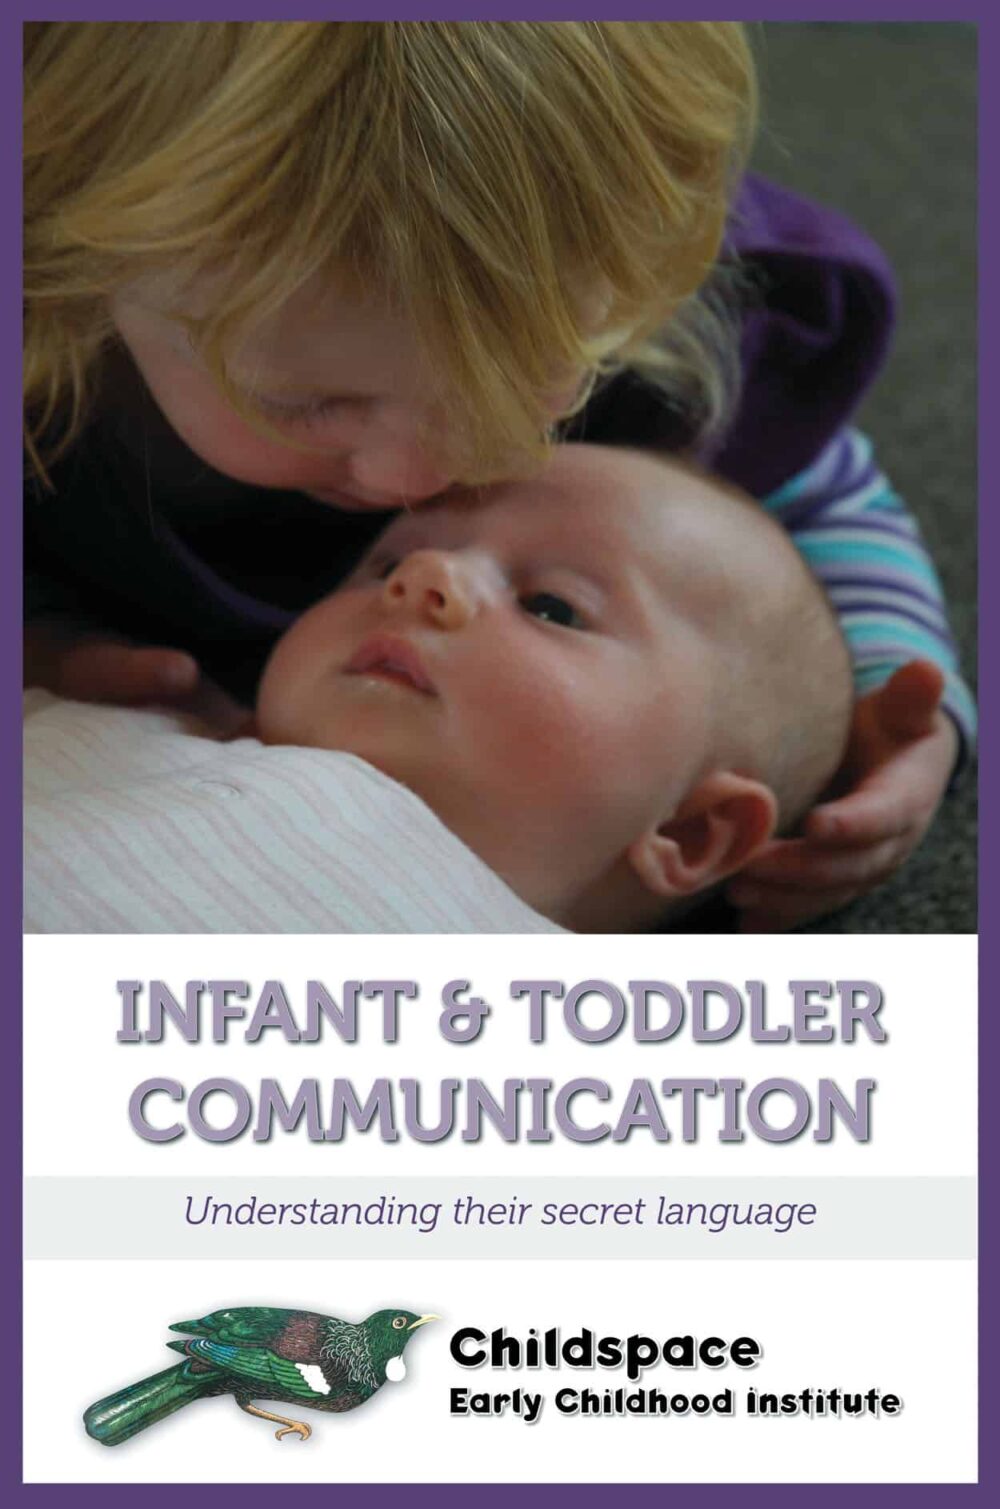 Infant and toddler communication book